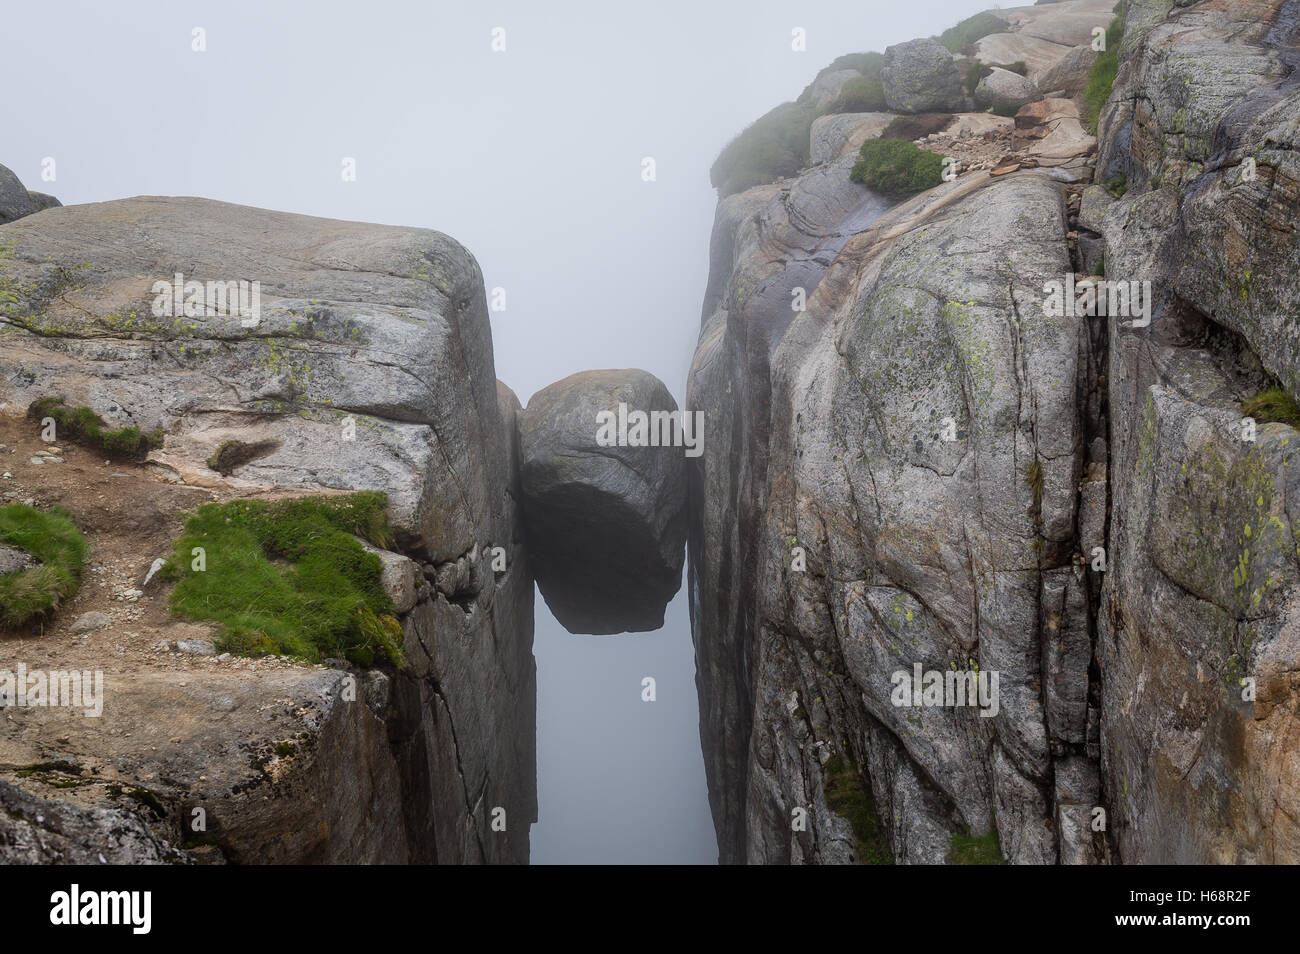 Kjerag stone, hanging on the cliff between two high rocks. Stock Photo